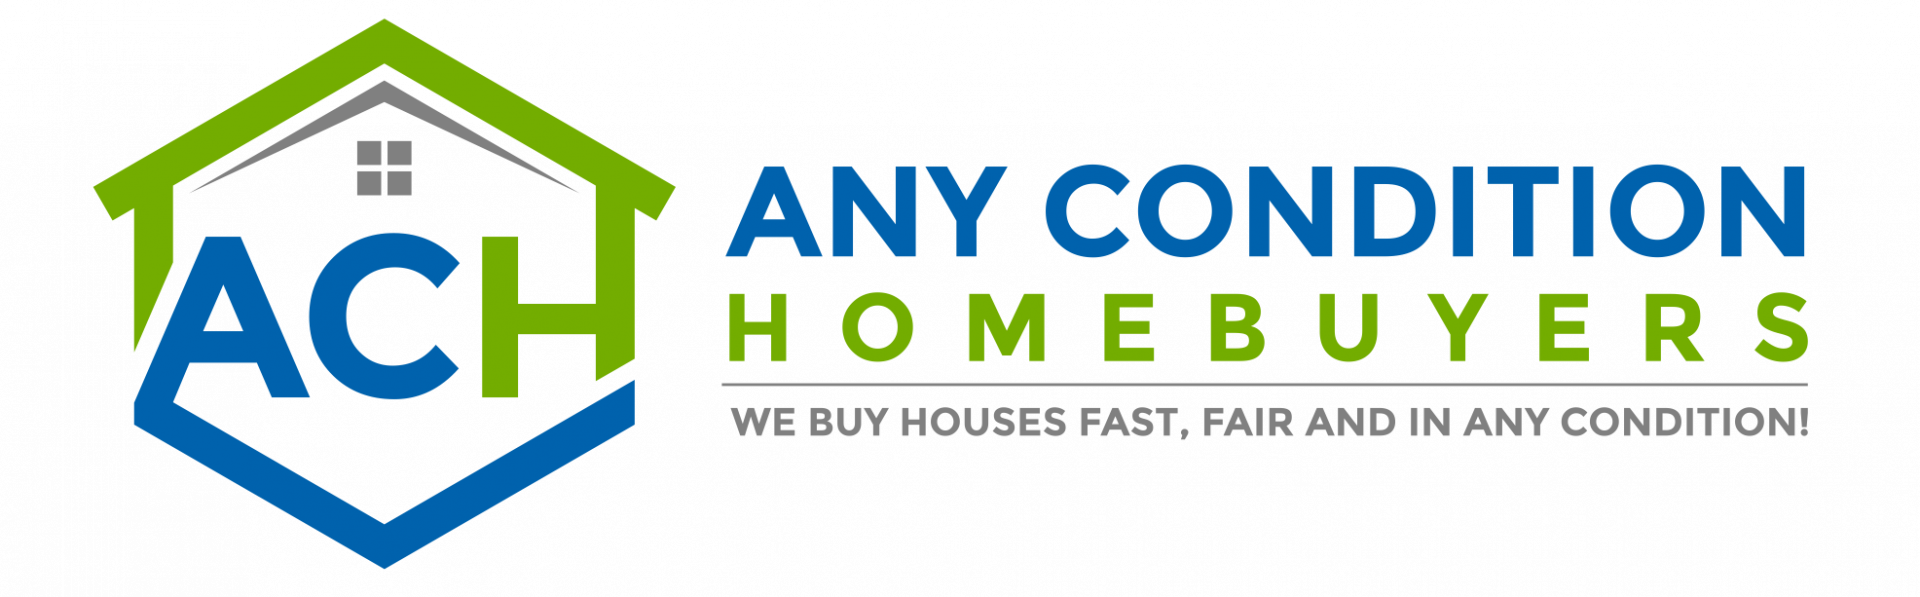 Any Condition Homebuyers  logo